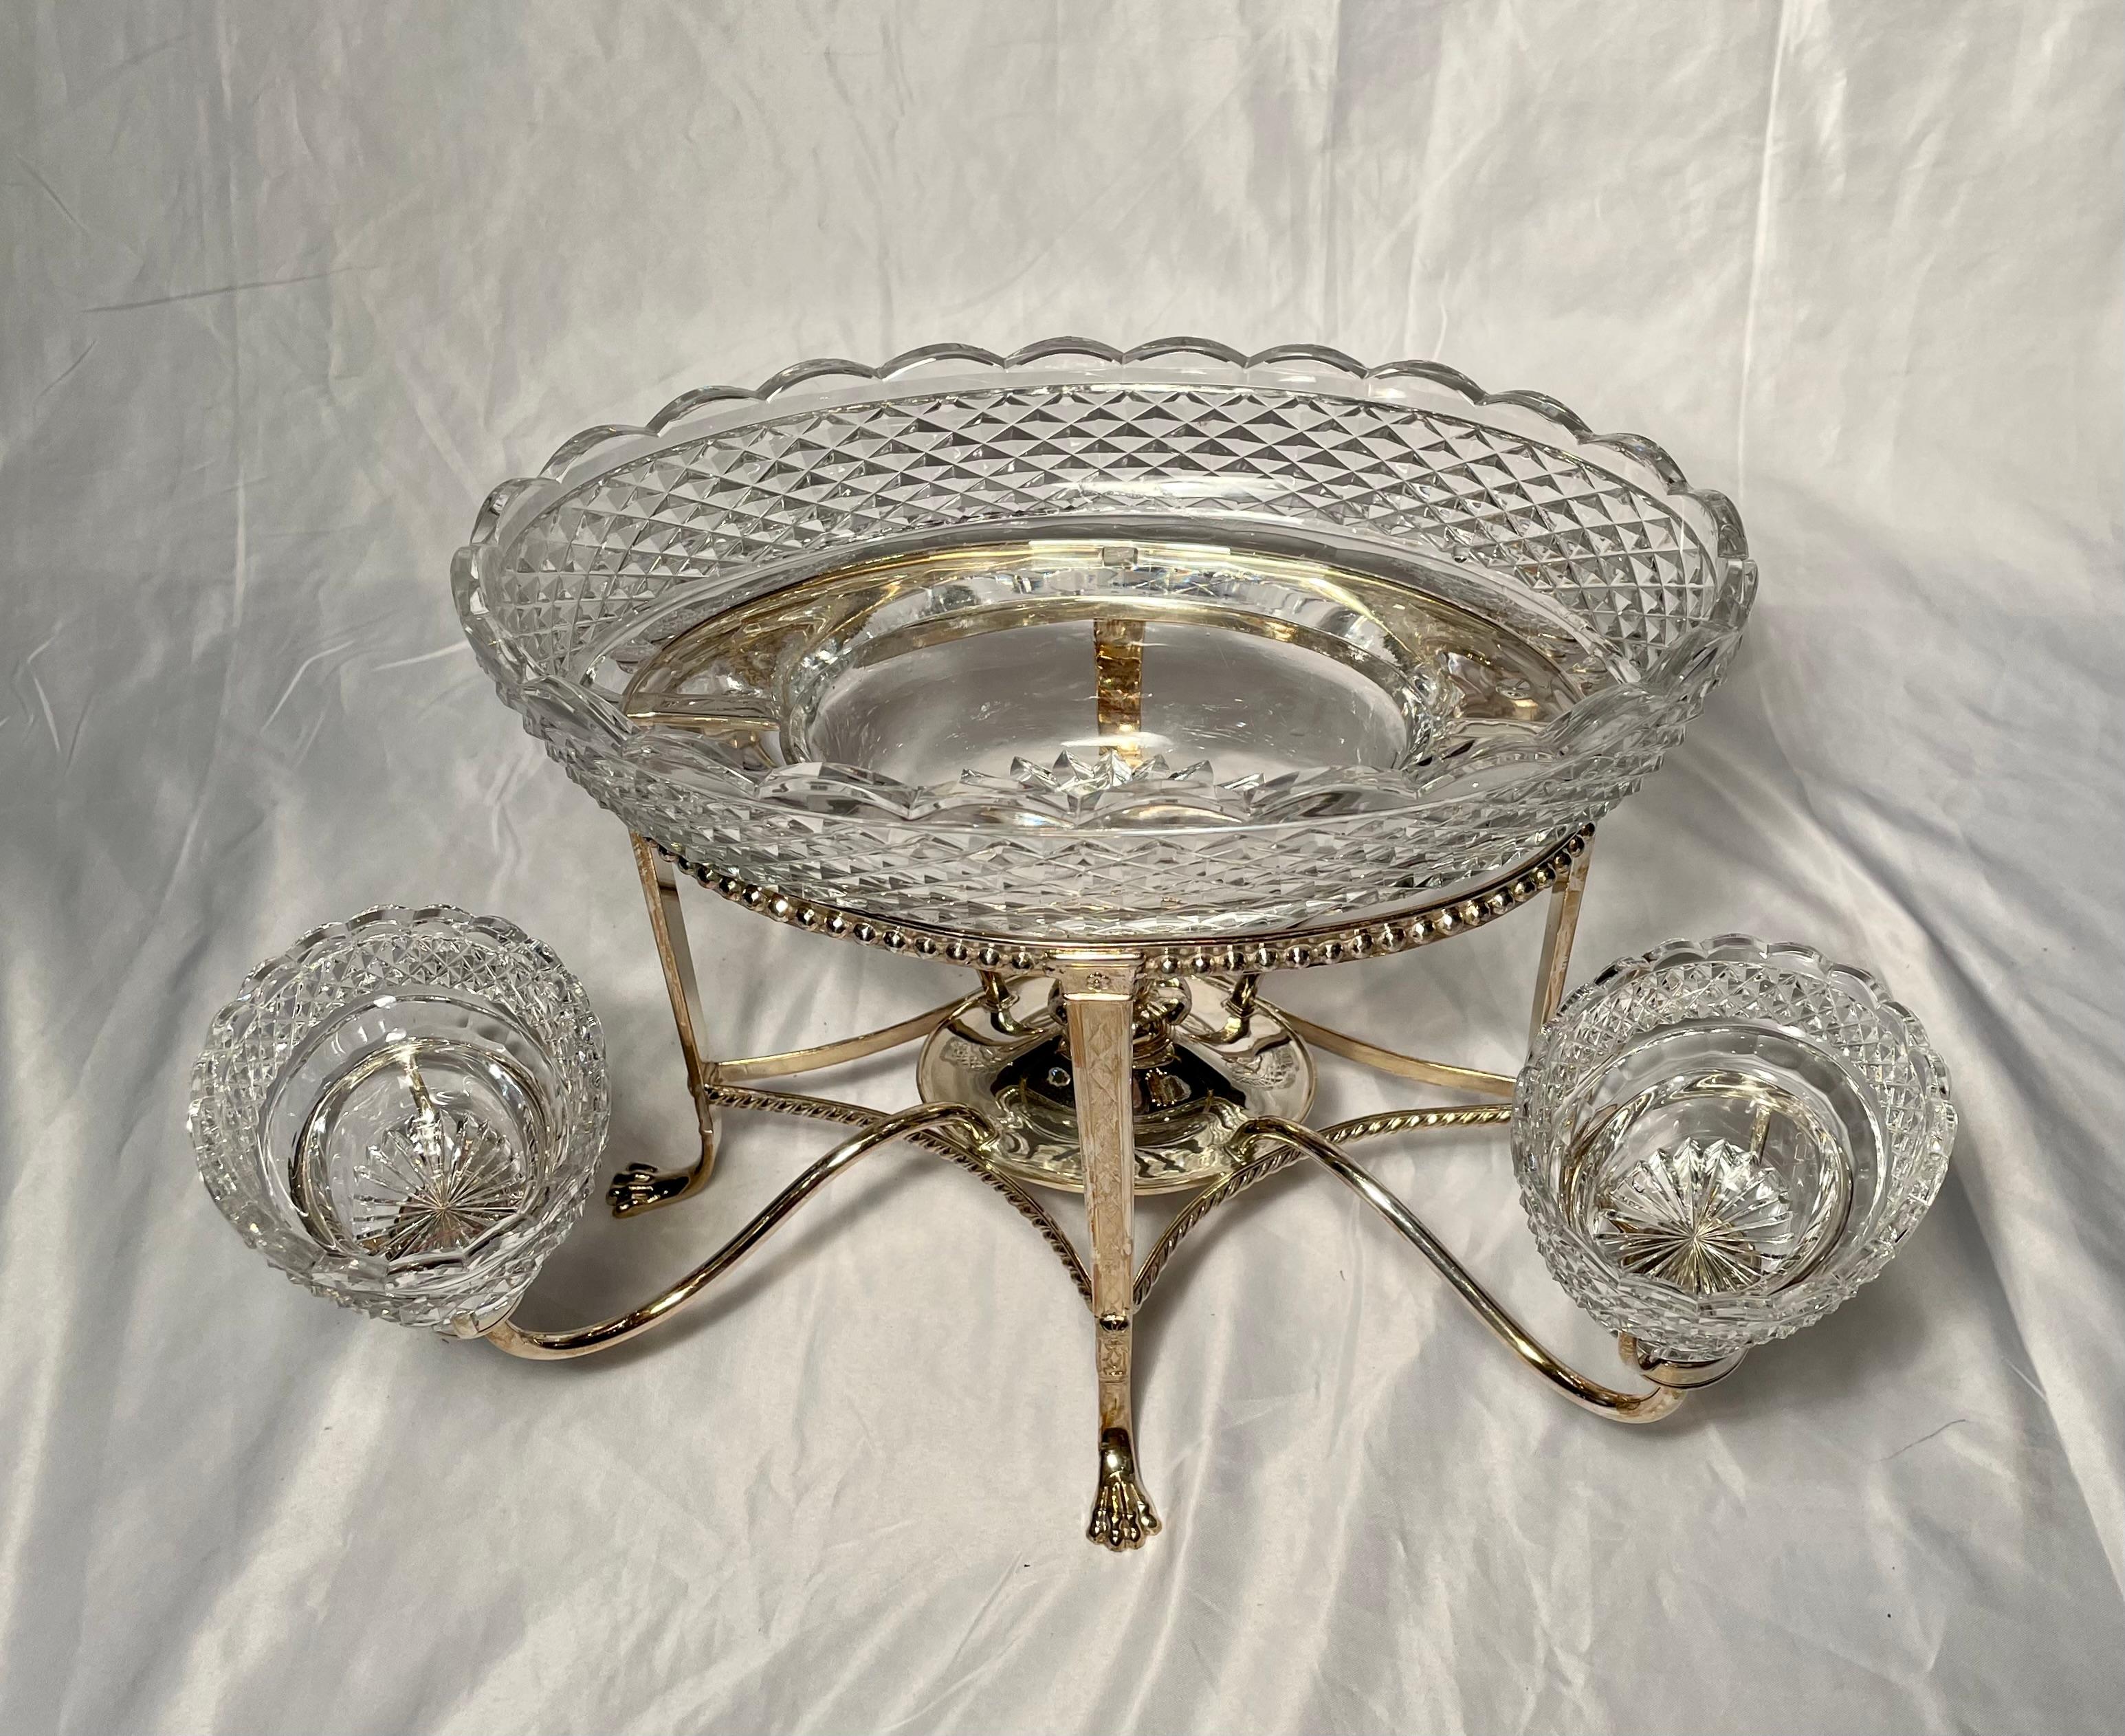 Antique English Silver Plated and Crystal Centerpiece, circa 1890-1910.